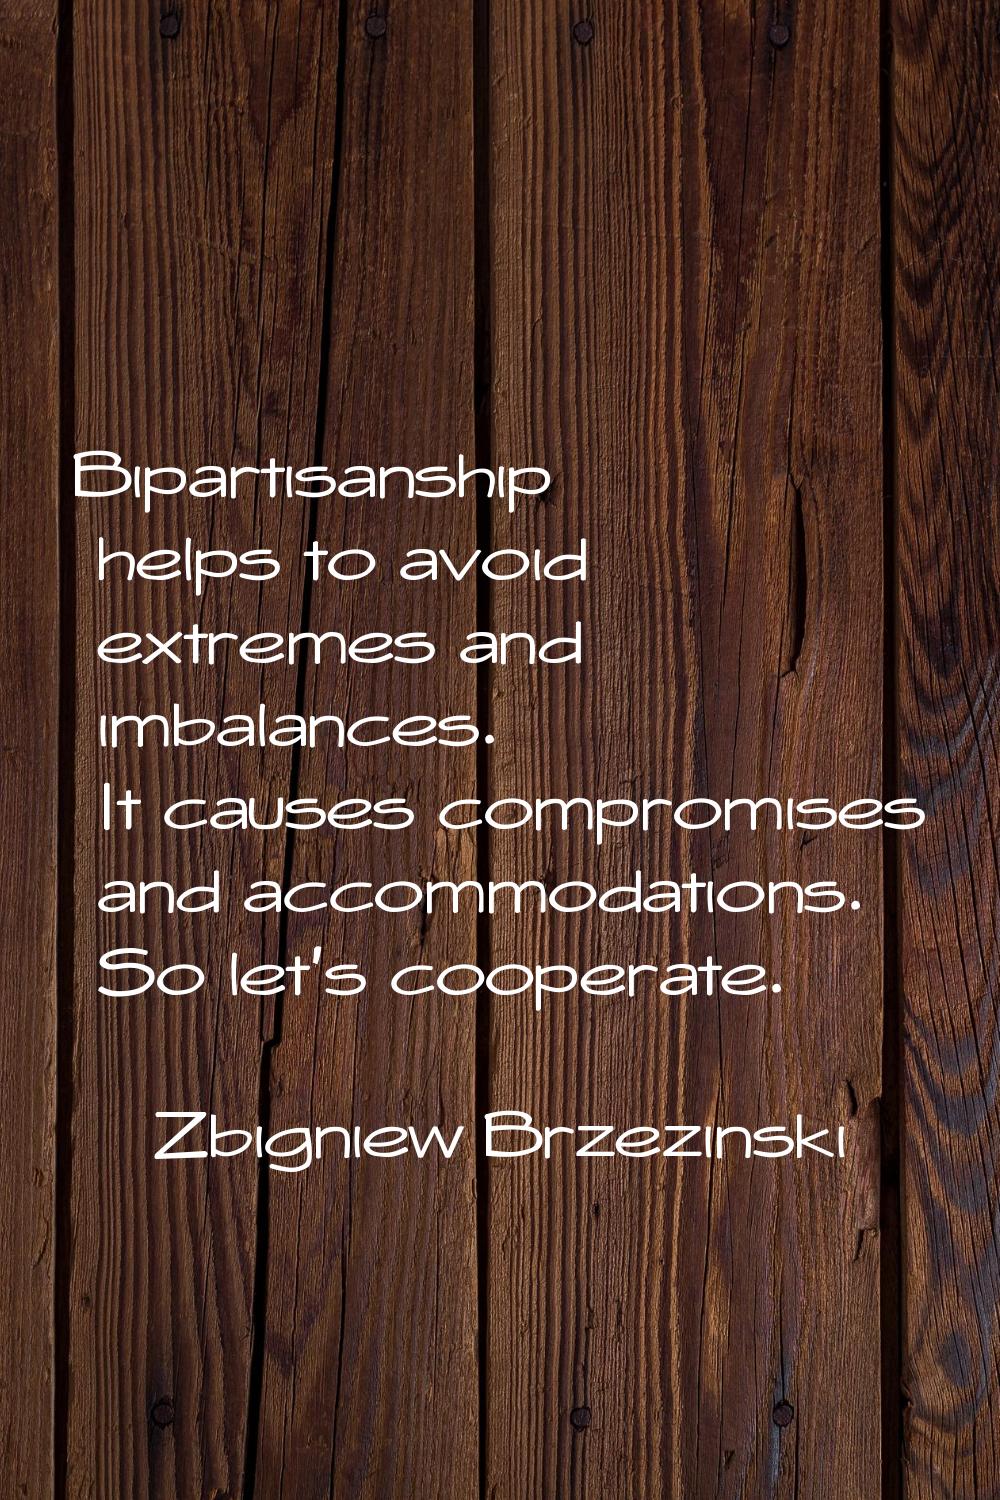 Bipartisanship helps to avoid extremes and imbalances. It causes compromises and accommodations. So